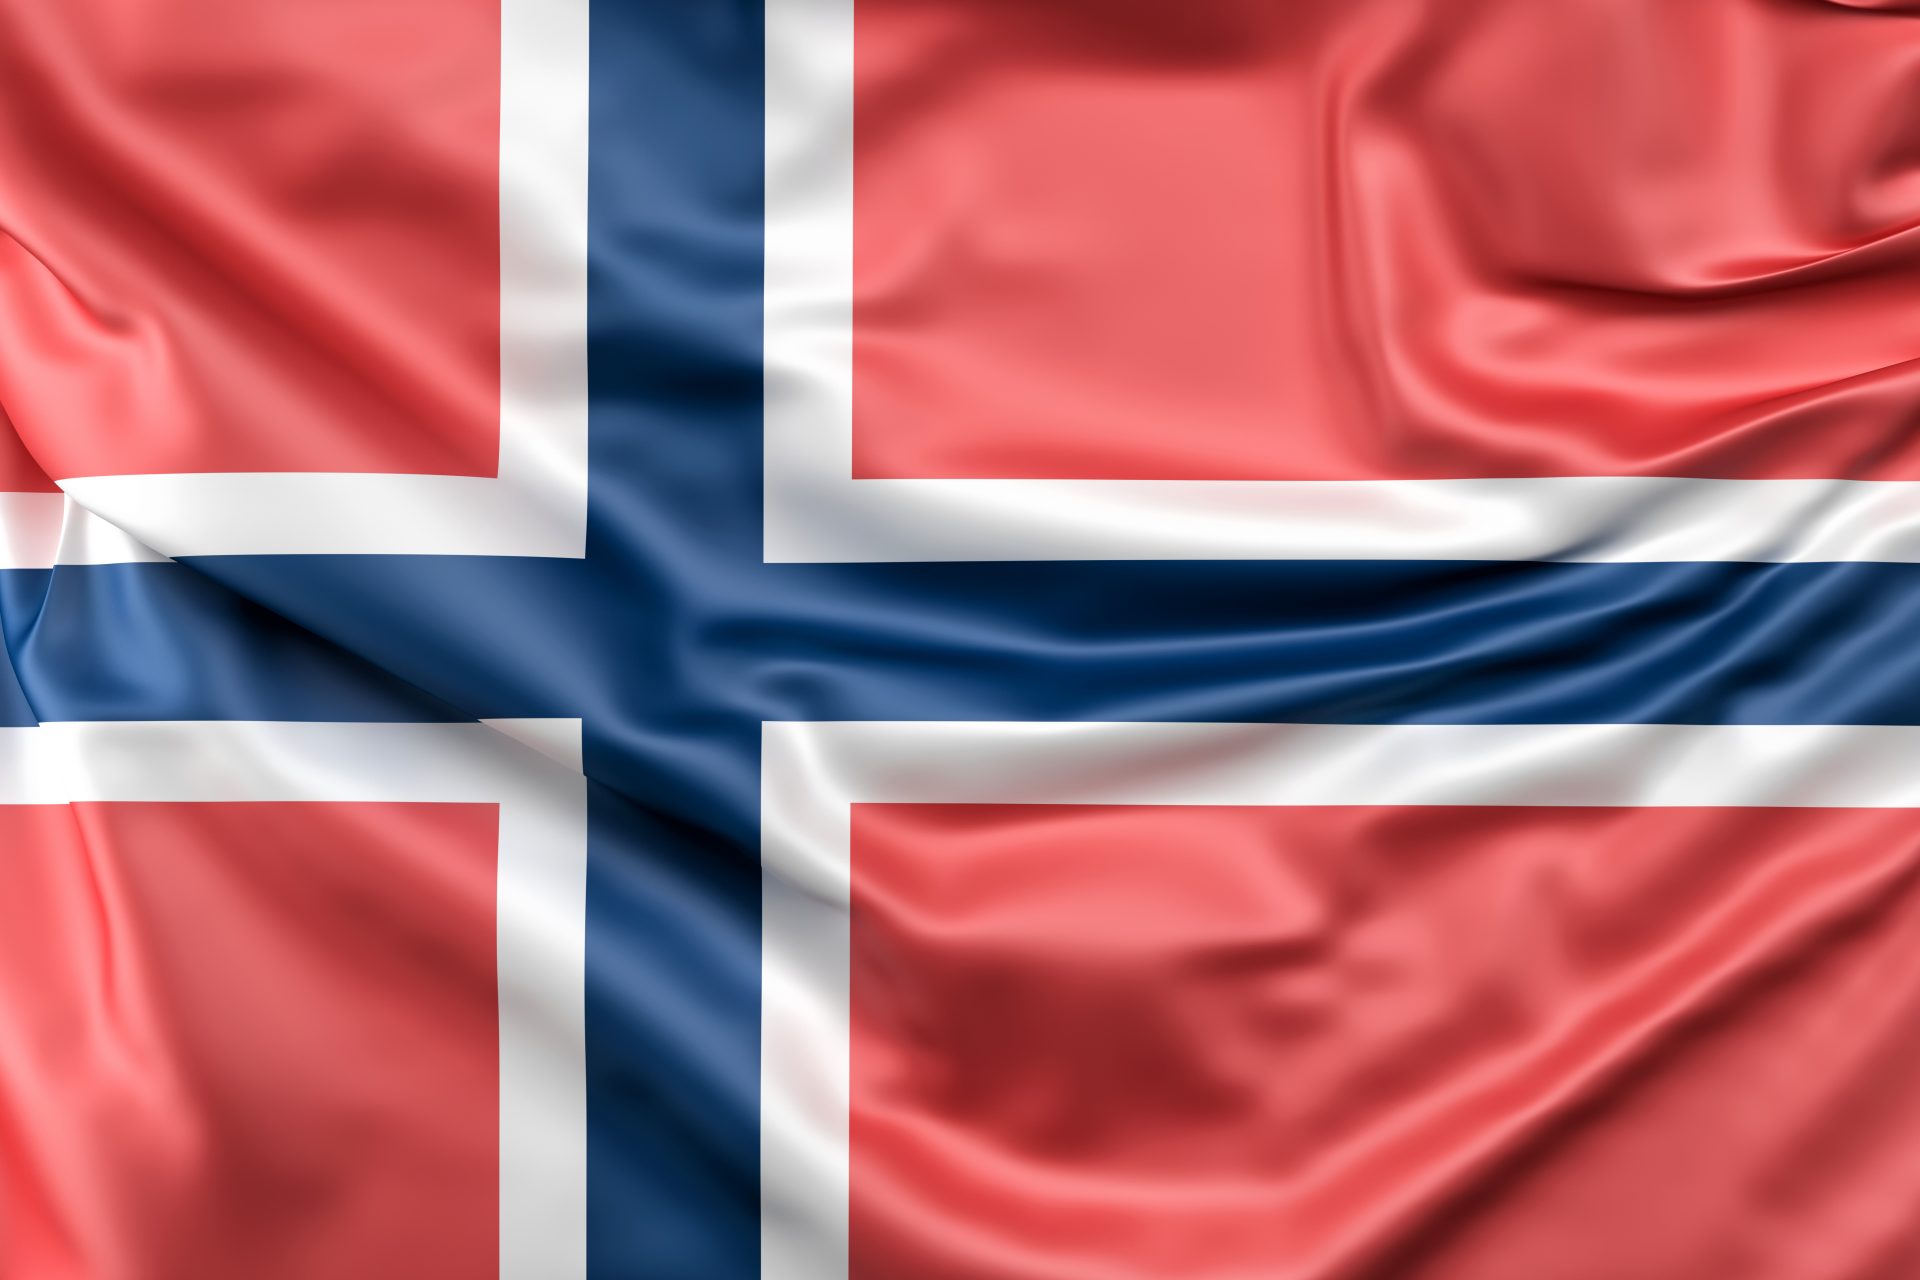 The new Norwegian Transparency Act: Here's what you need to know